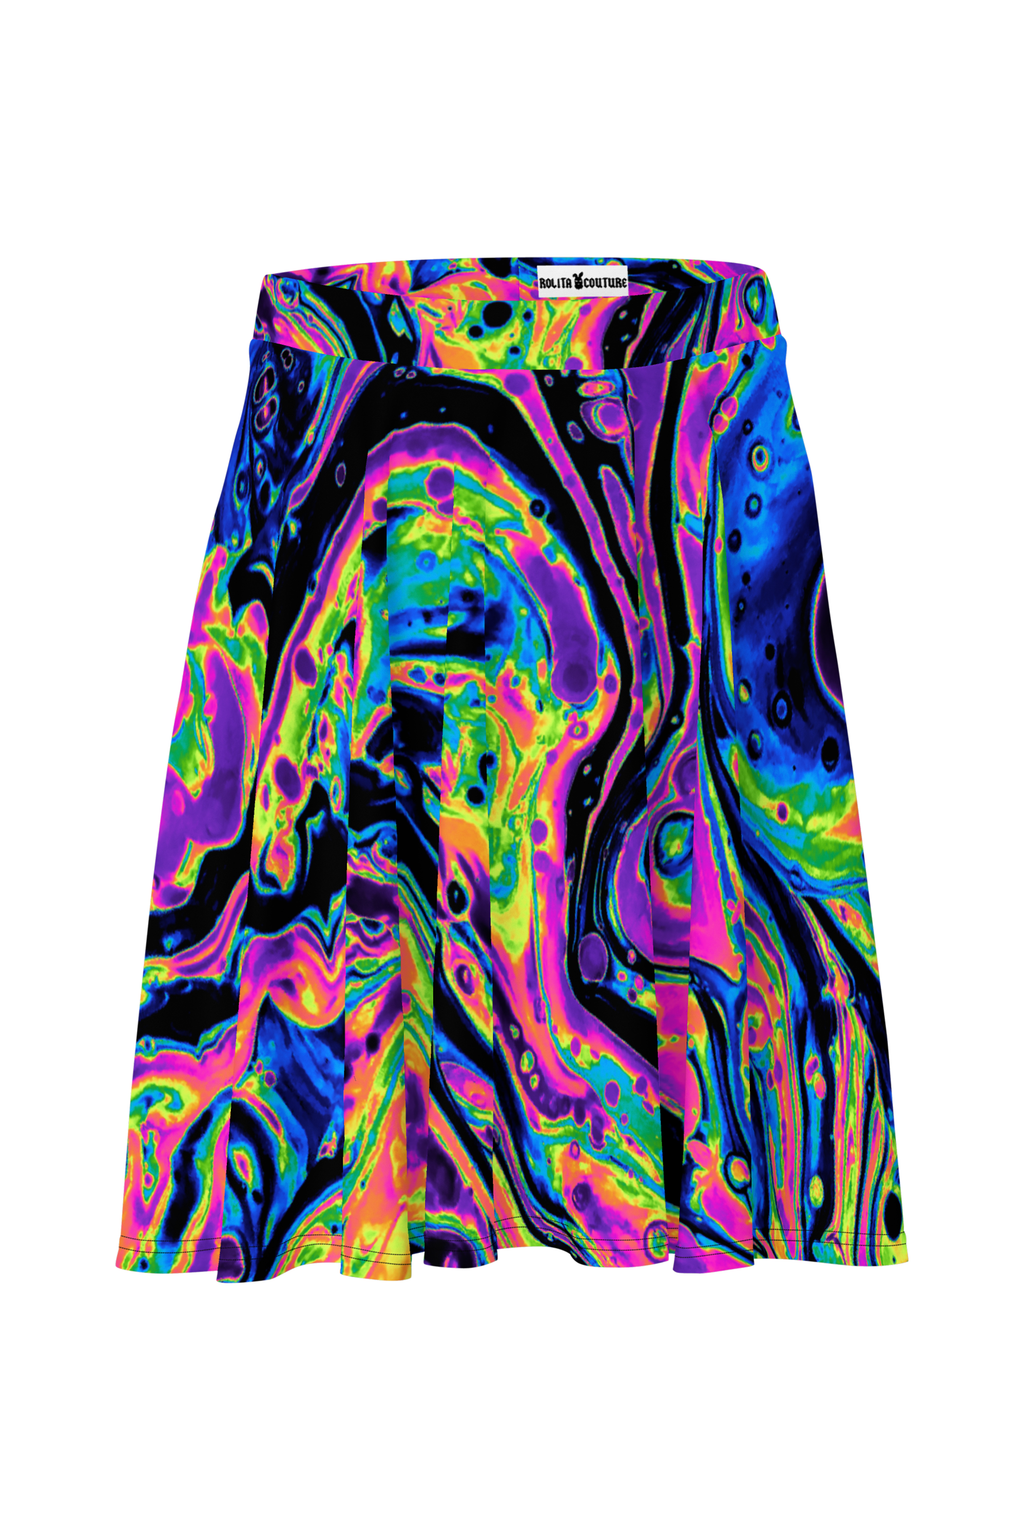 Dirty Drops Skater Skirt (Made to Order) - Liquid Mirage